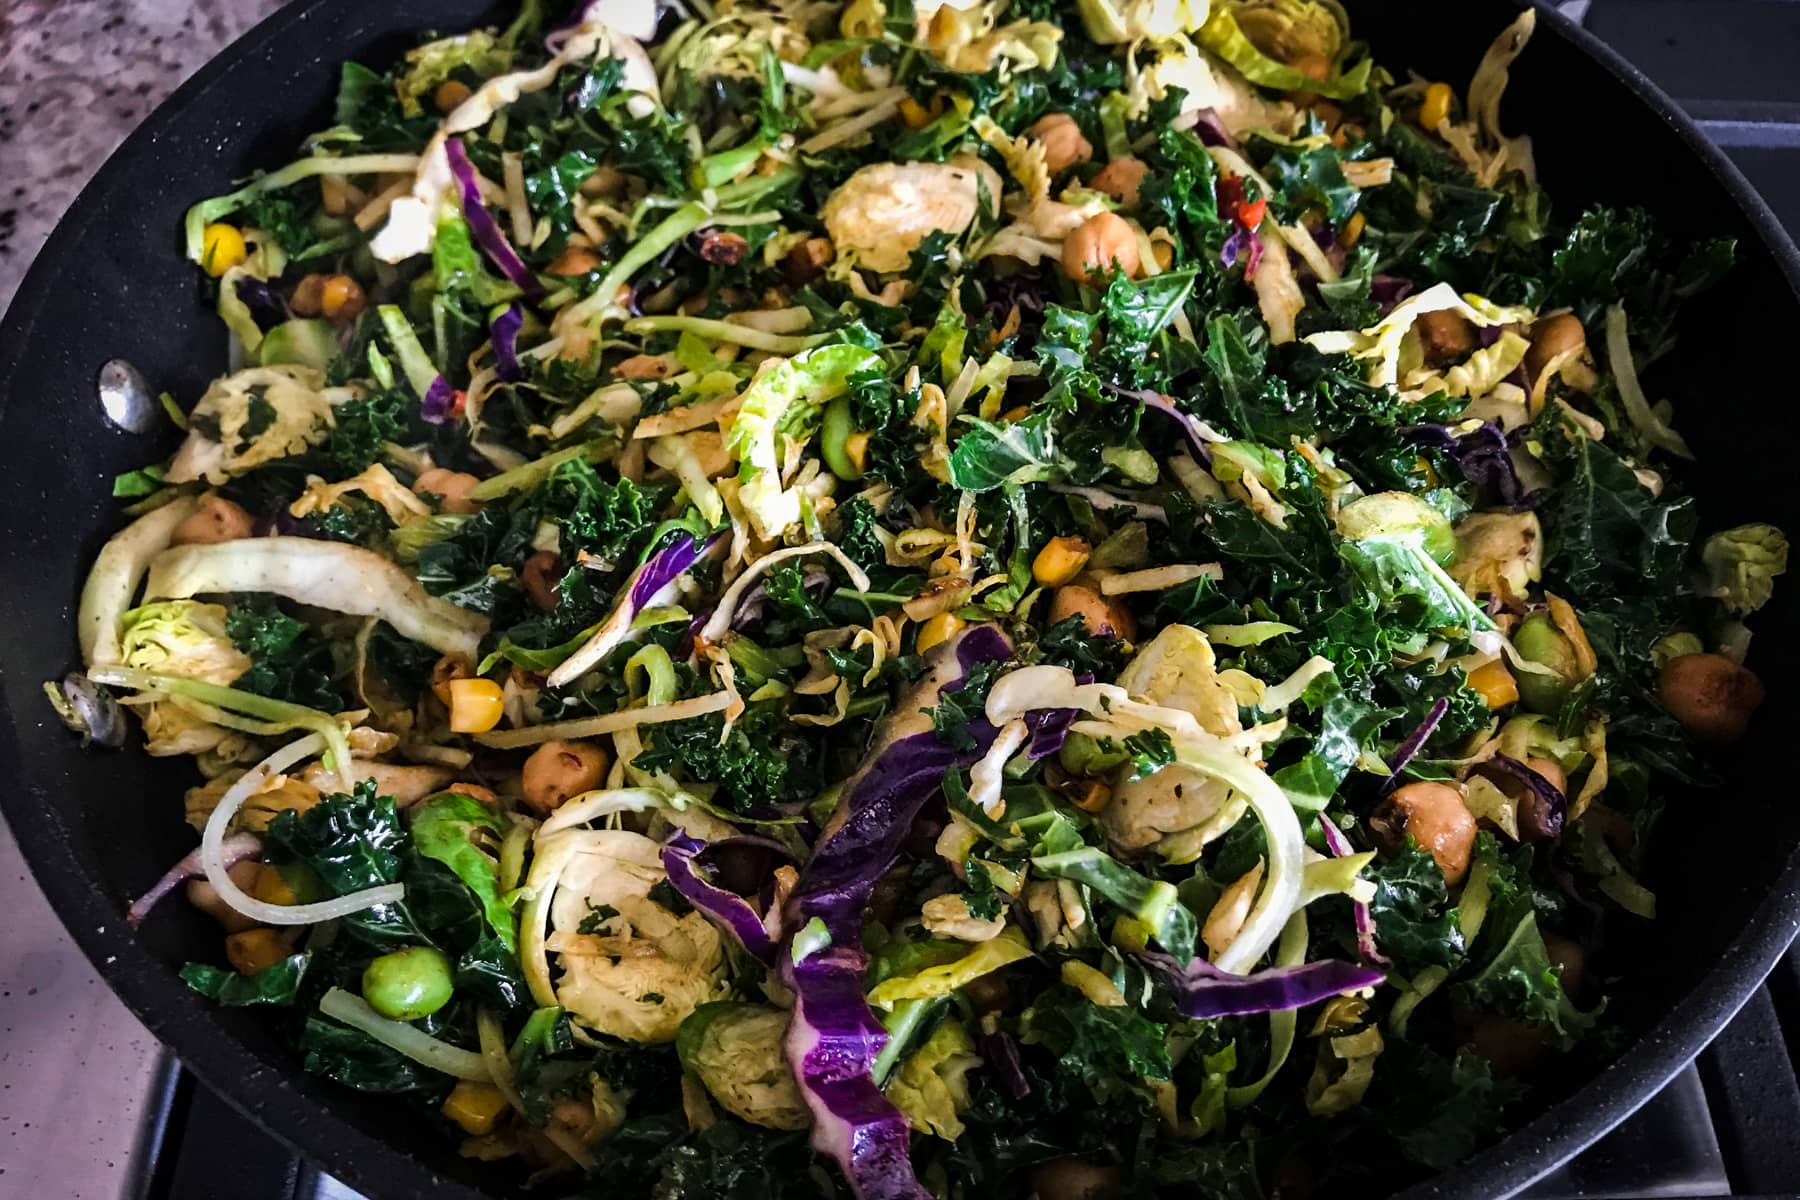 Kale and cabbage salad in a skillet